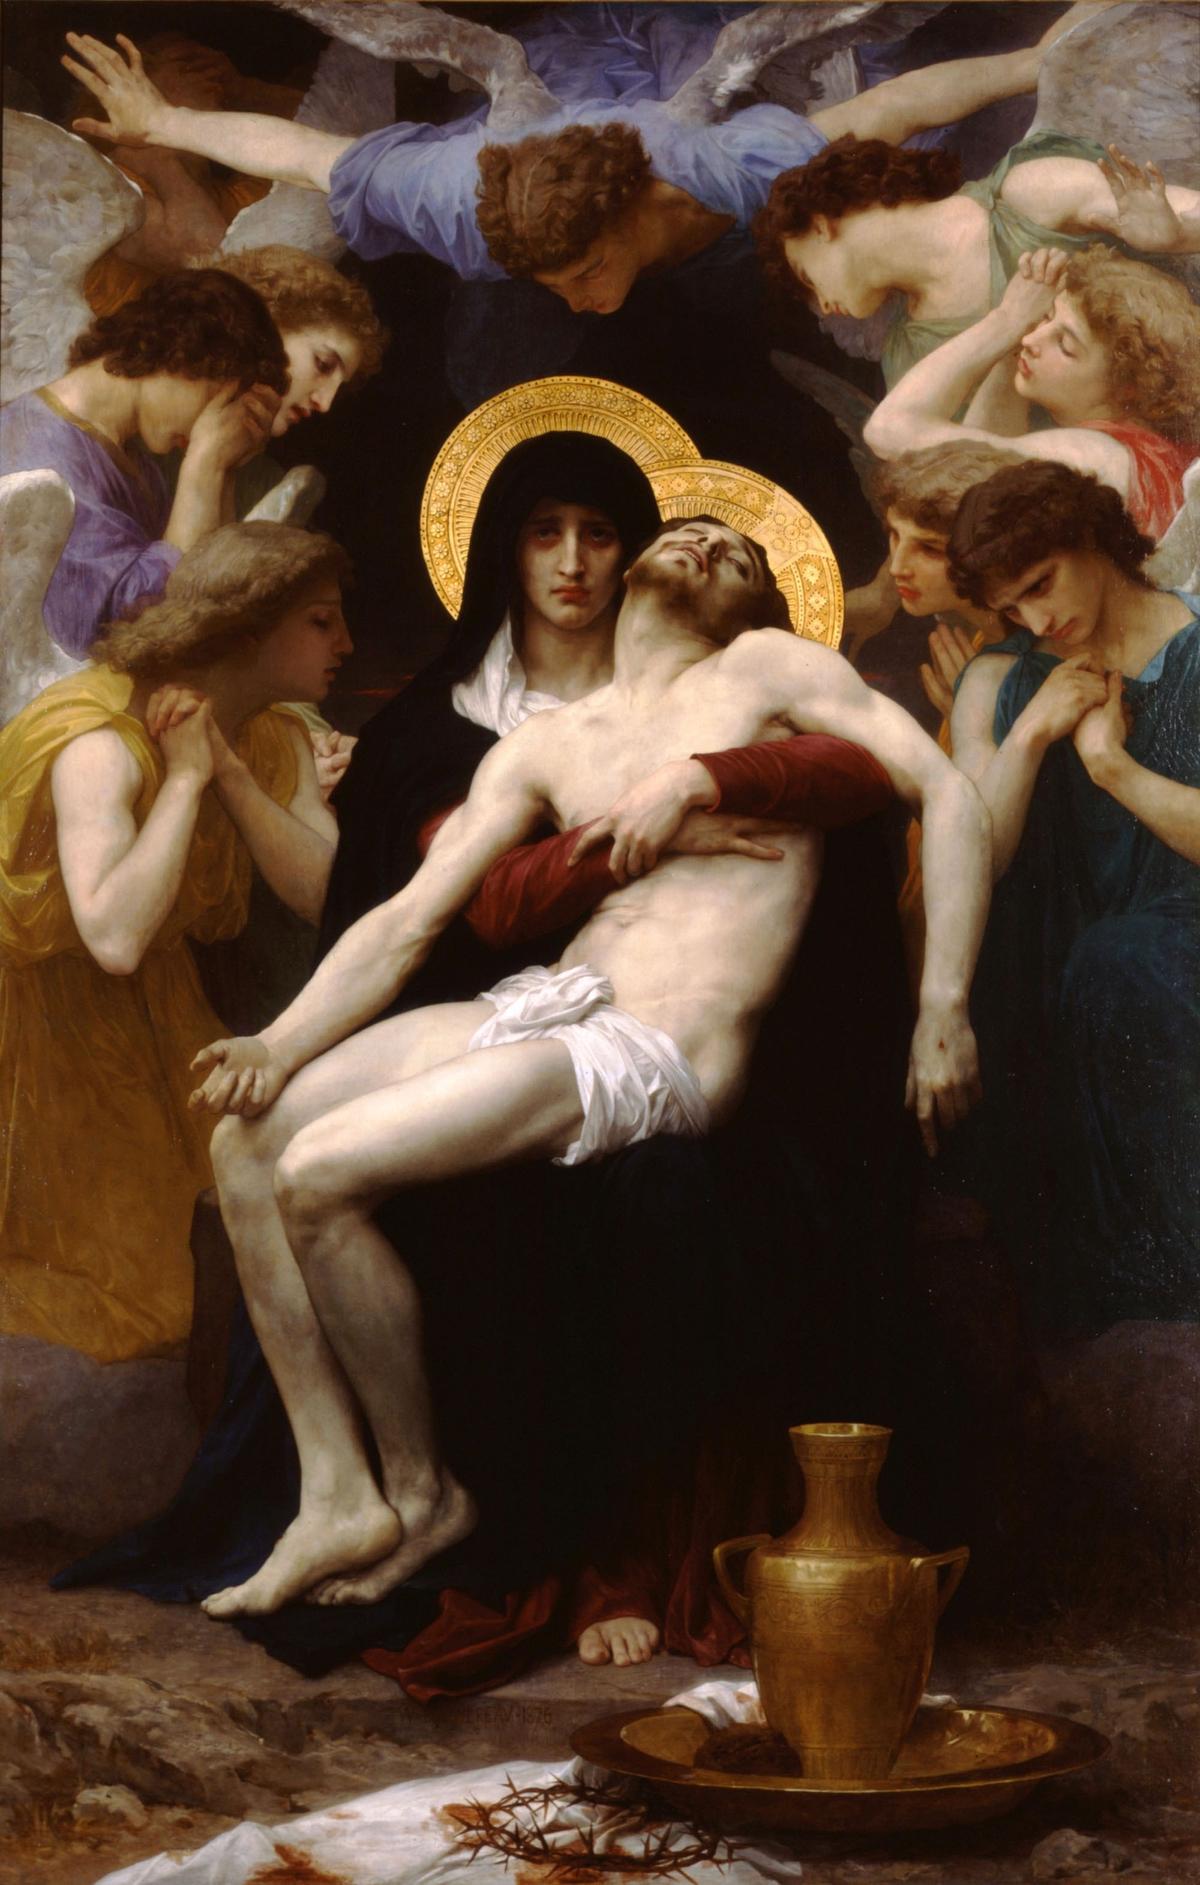 “Pietà,” circa 1876, by William-Adolphe Bouguereau. Oil on canvas; 87.7 inches by 58.7 inches. Private Collection. (Public Domain)